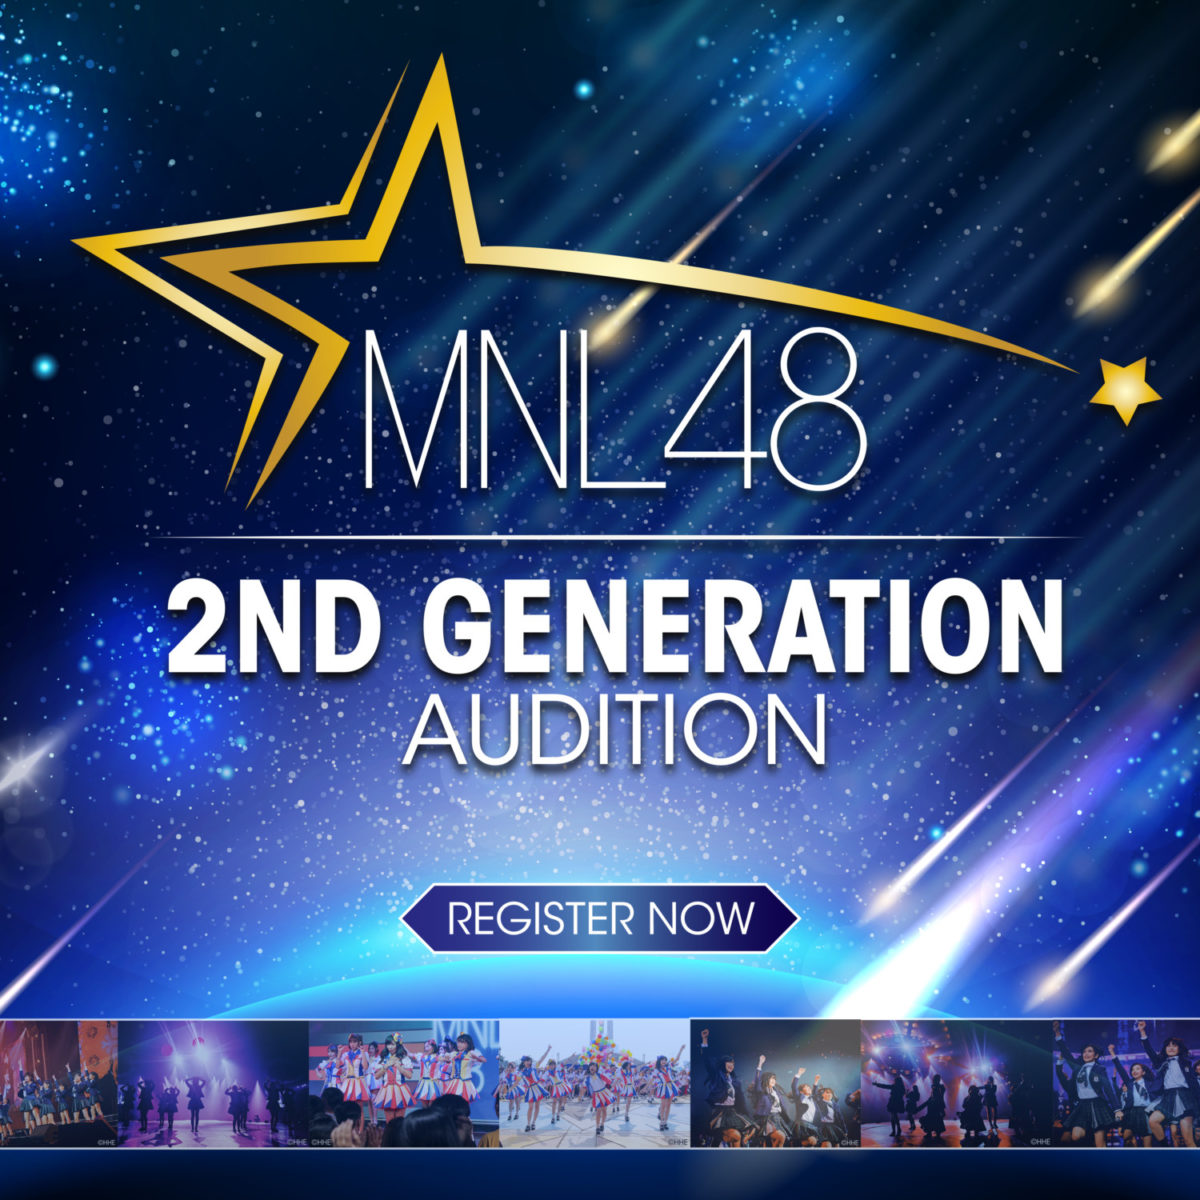 Mnl48 Weekly Blog: The Next Chapter?